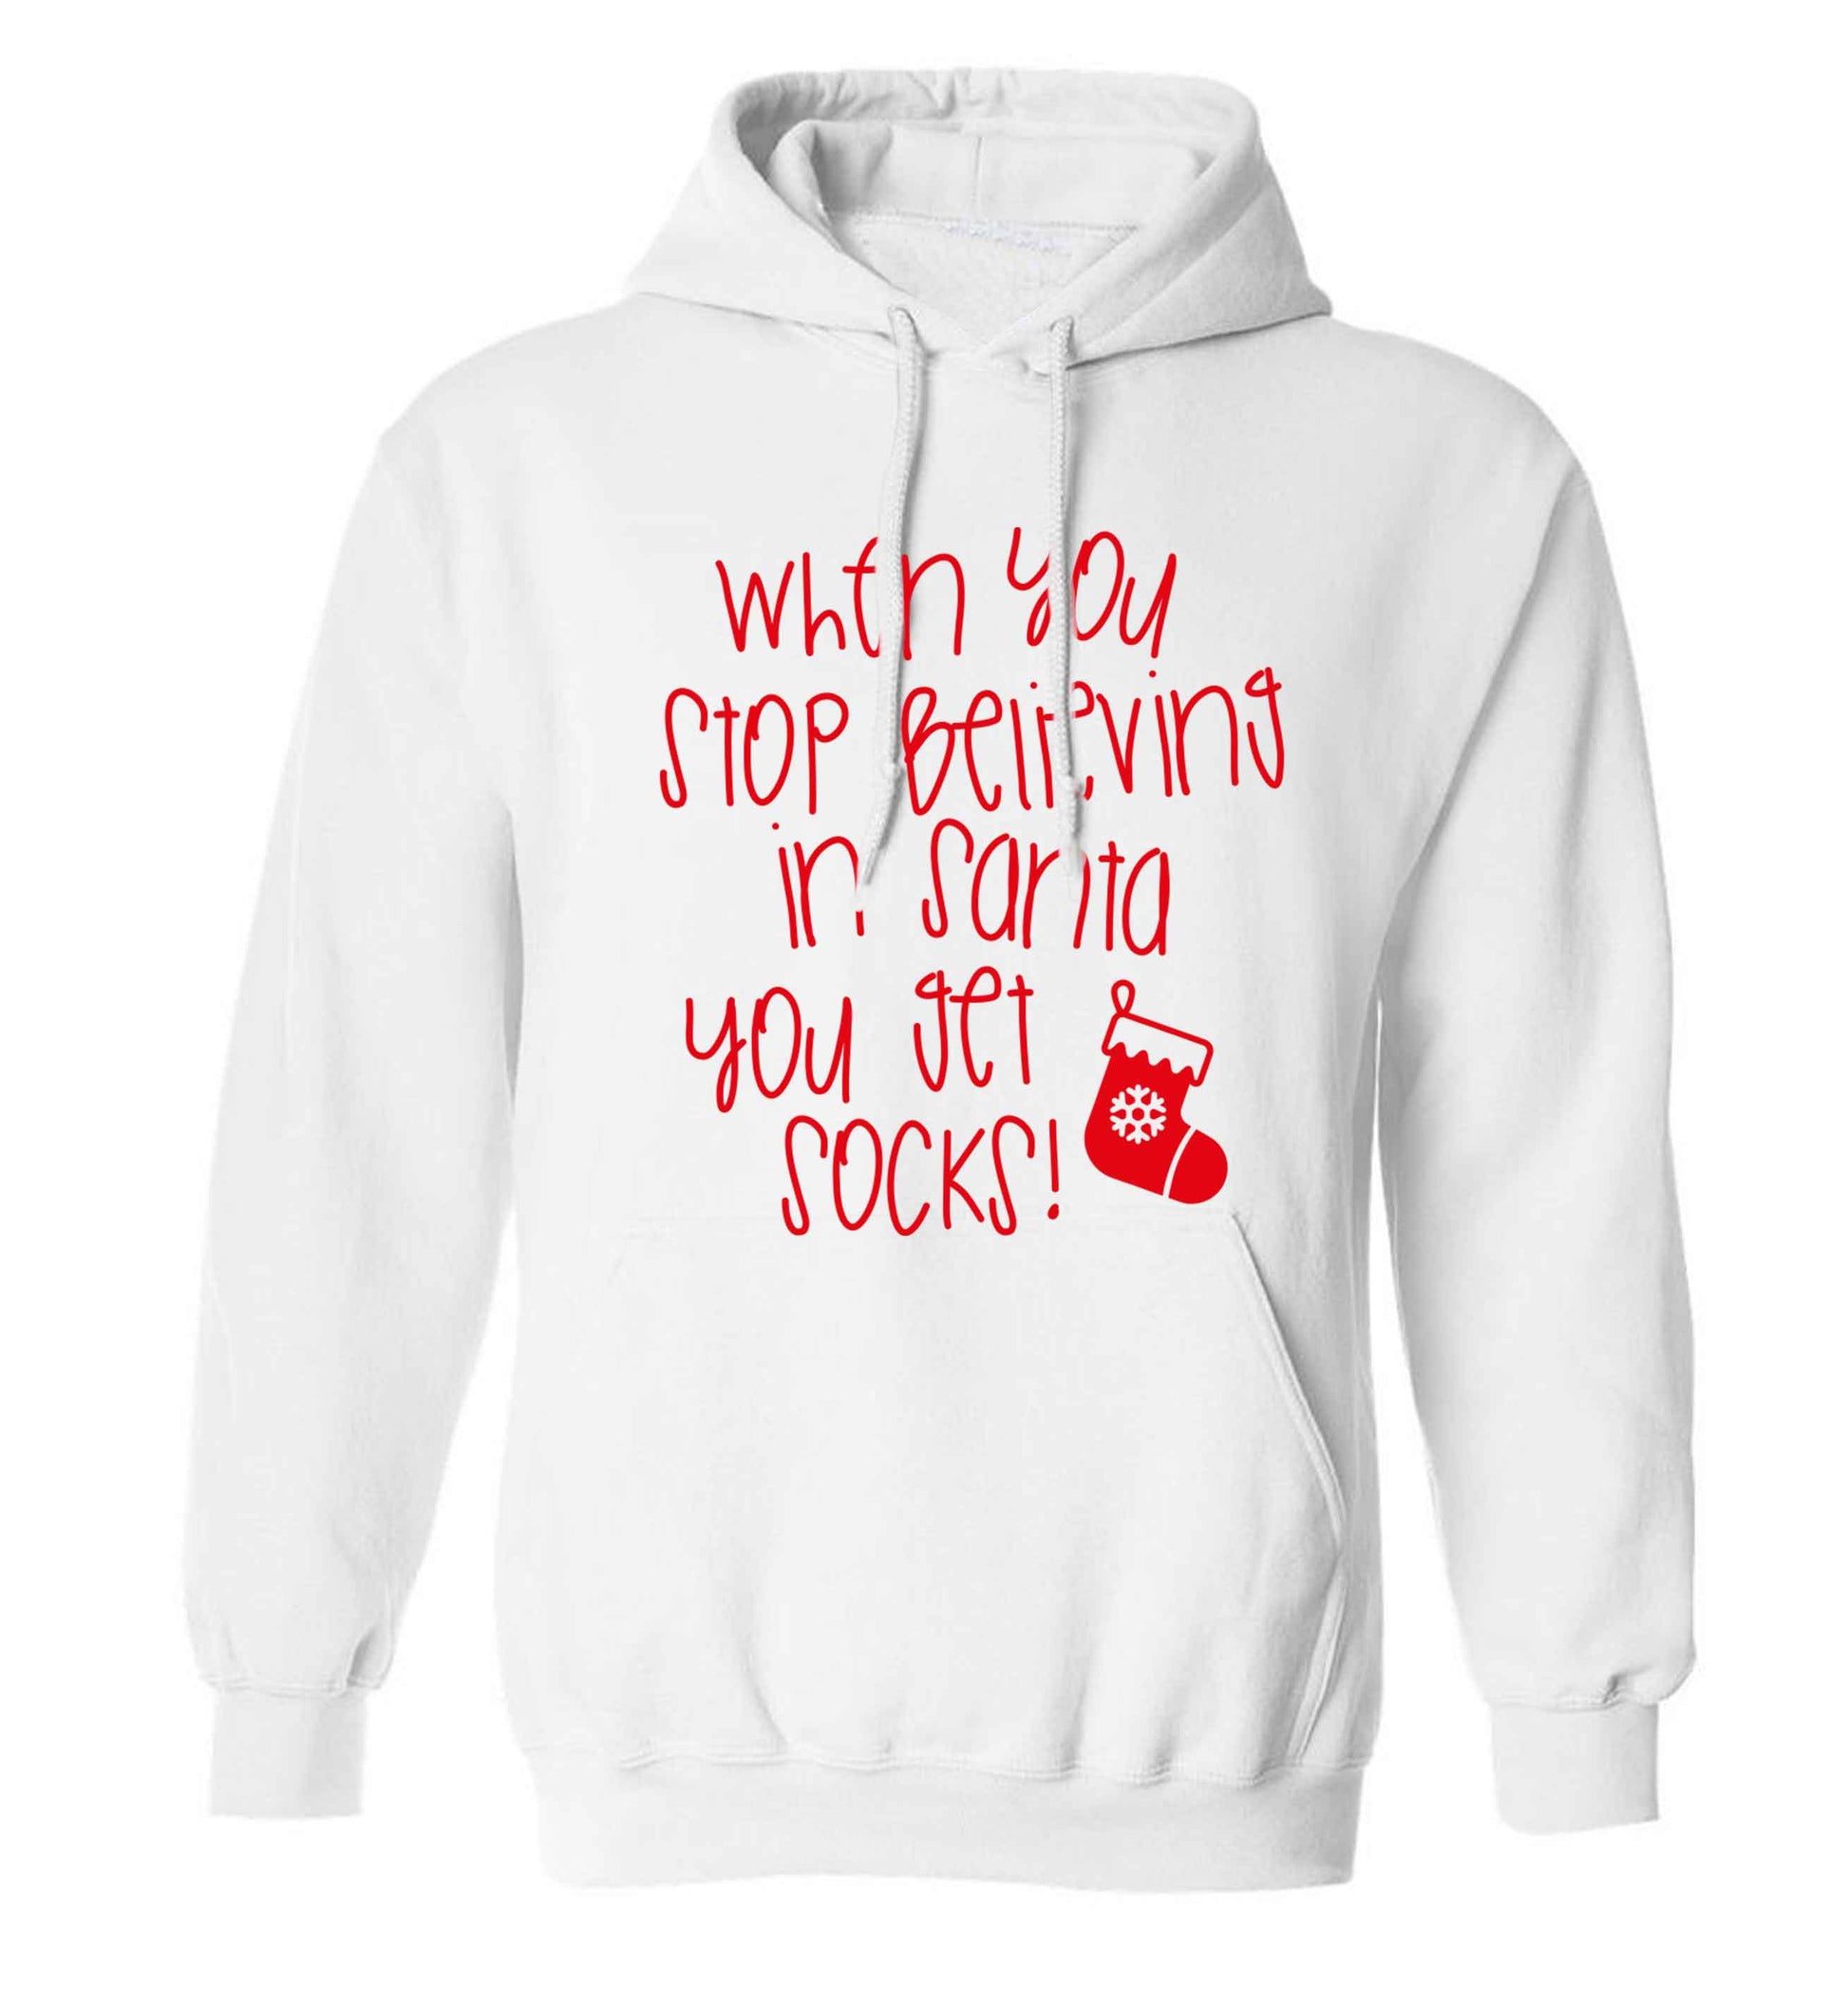 When you stop believing in santa you get socks adults unisex white hoodie 2XL